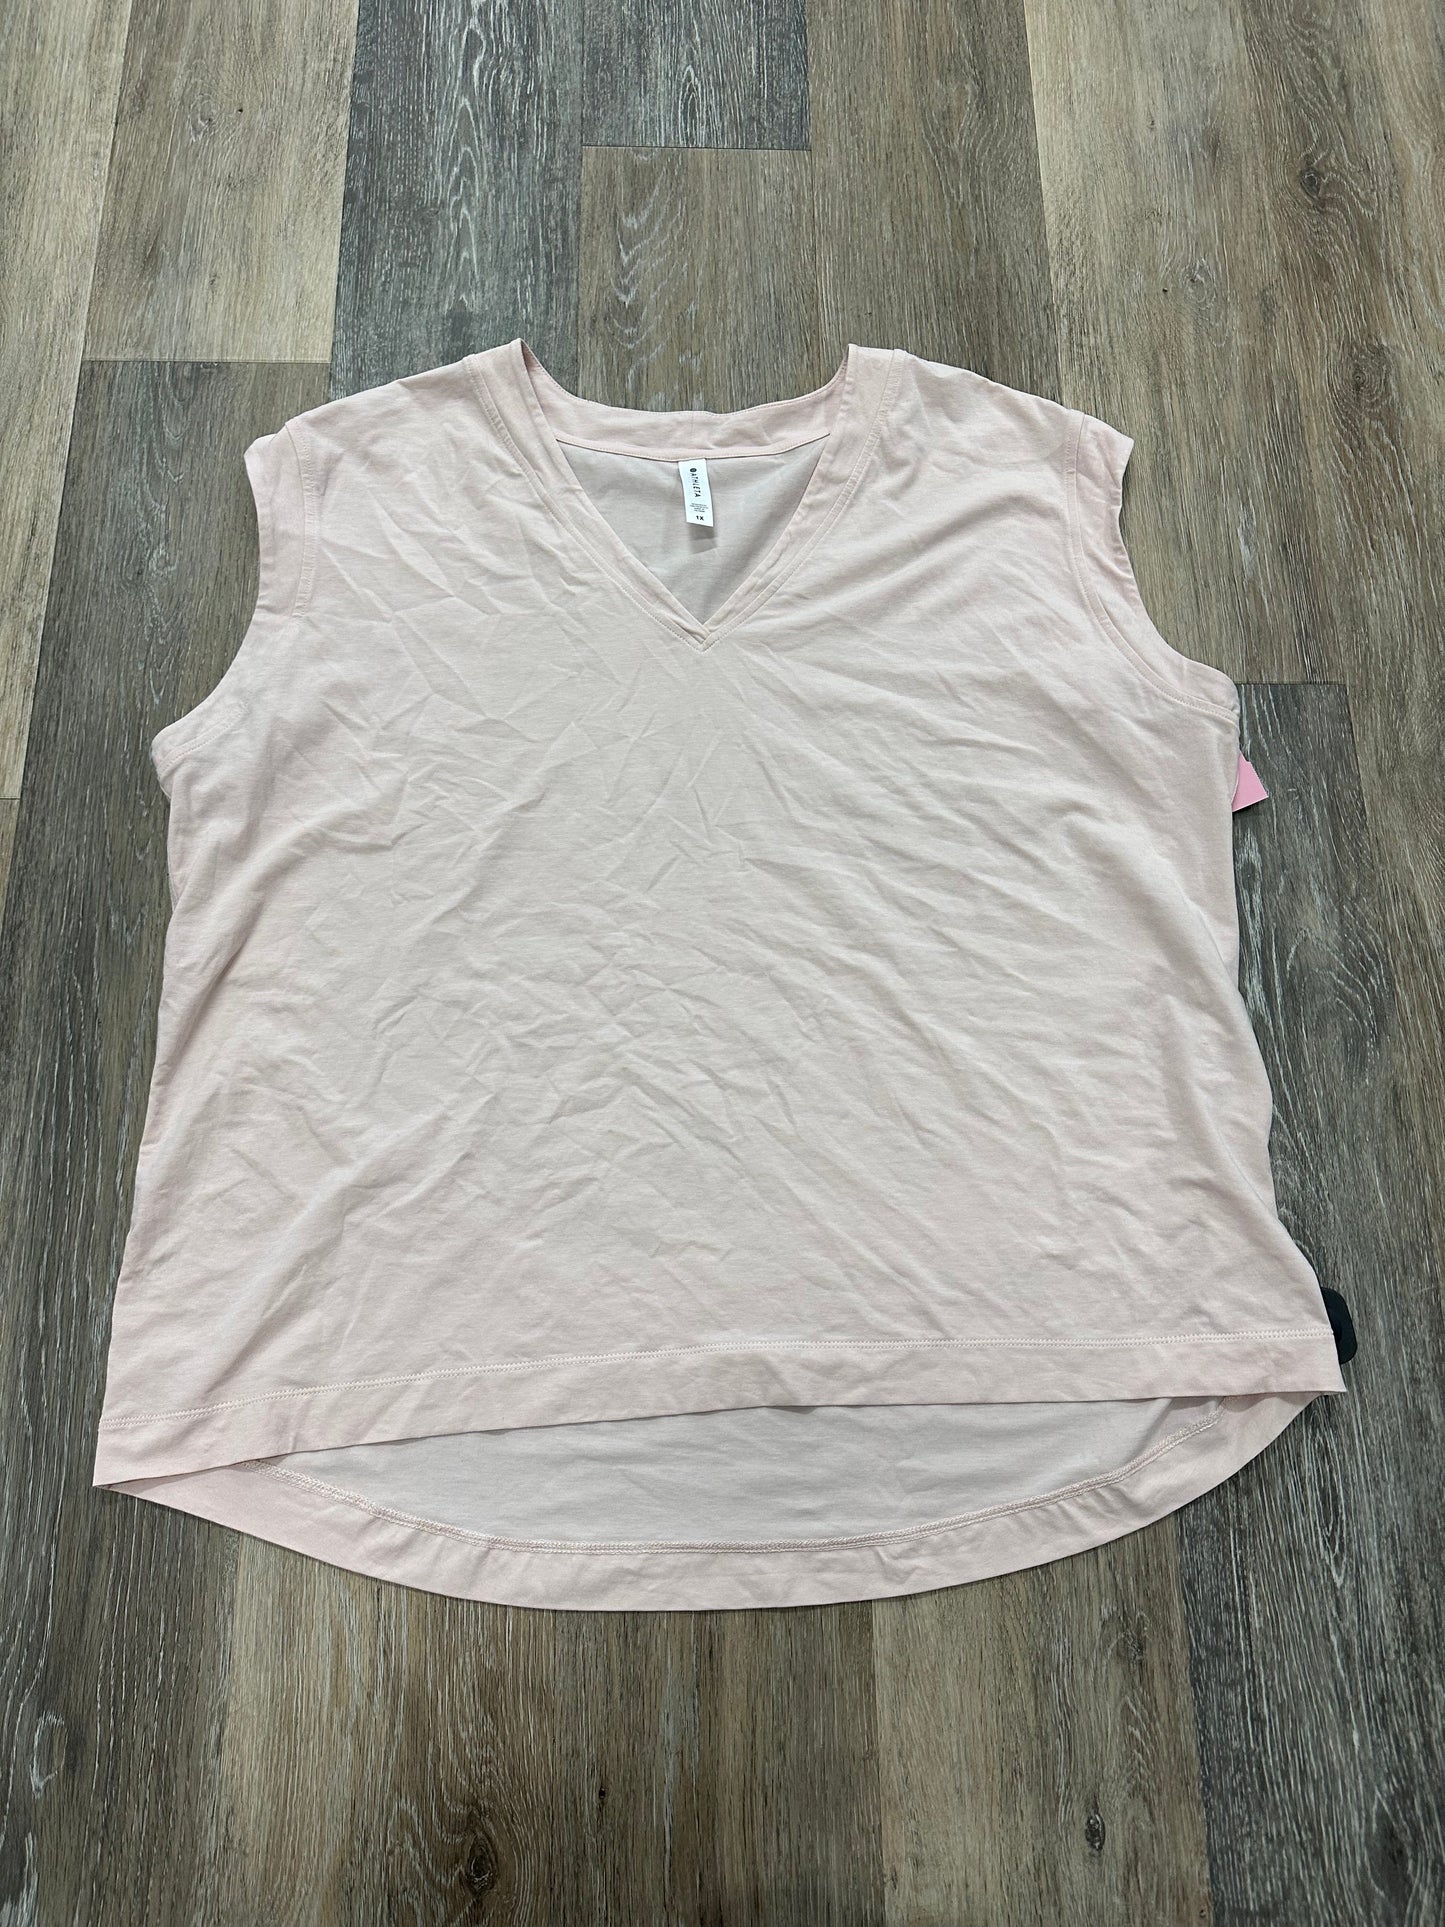 Athletic Top Short Sleeve By Athleta  Size: 1x